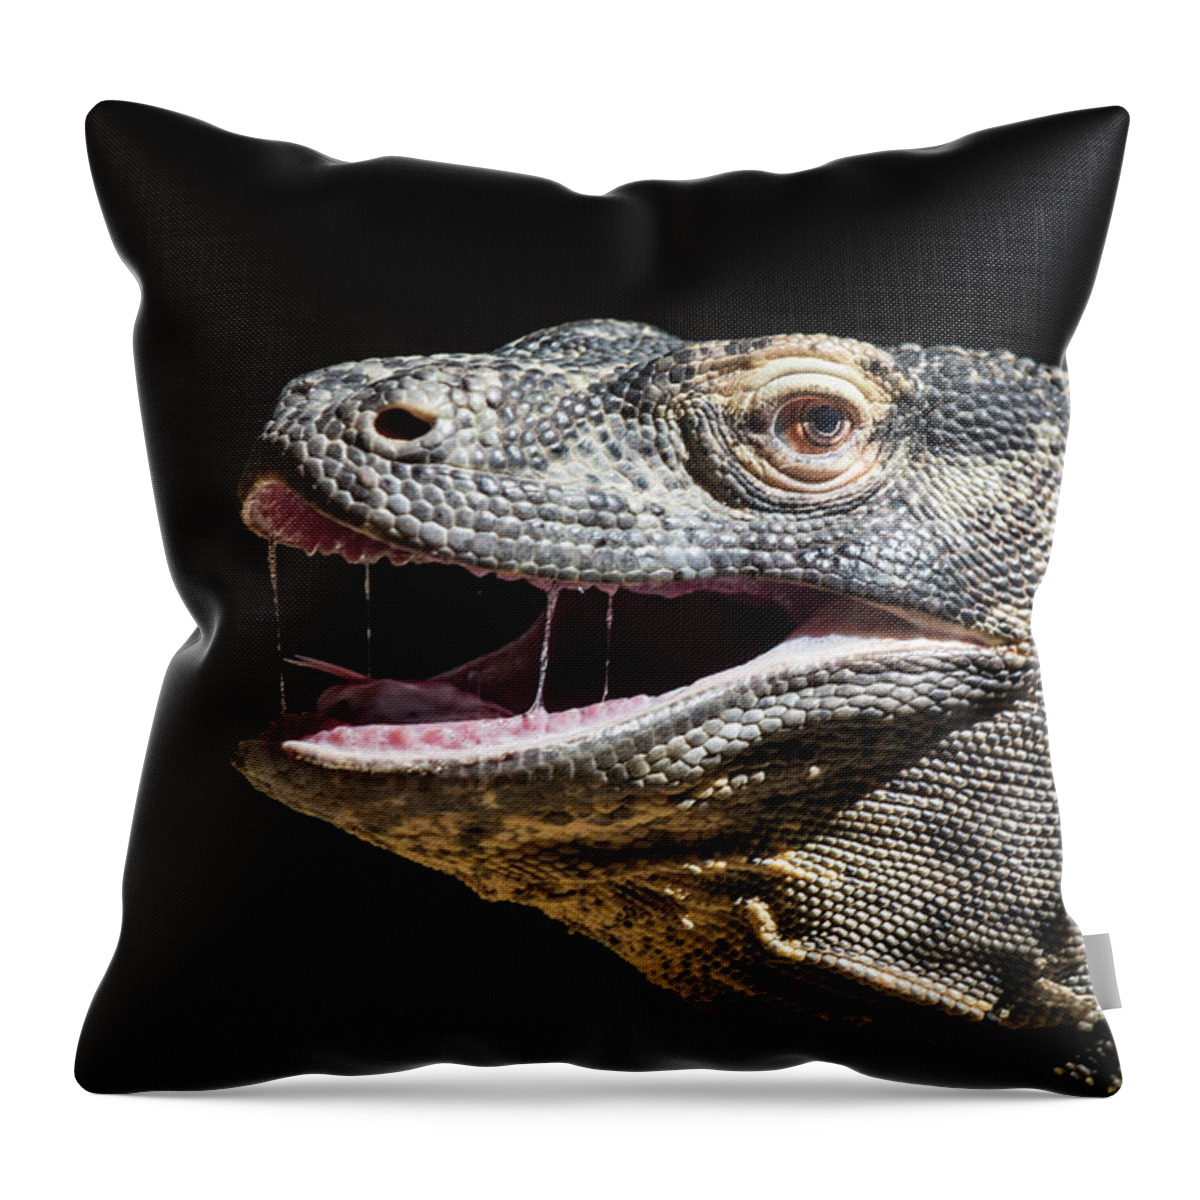 Zoo Throw Pillow featuring the photograph Komodo Dragon Profile by Bill Cubitt